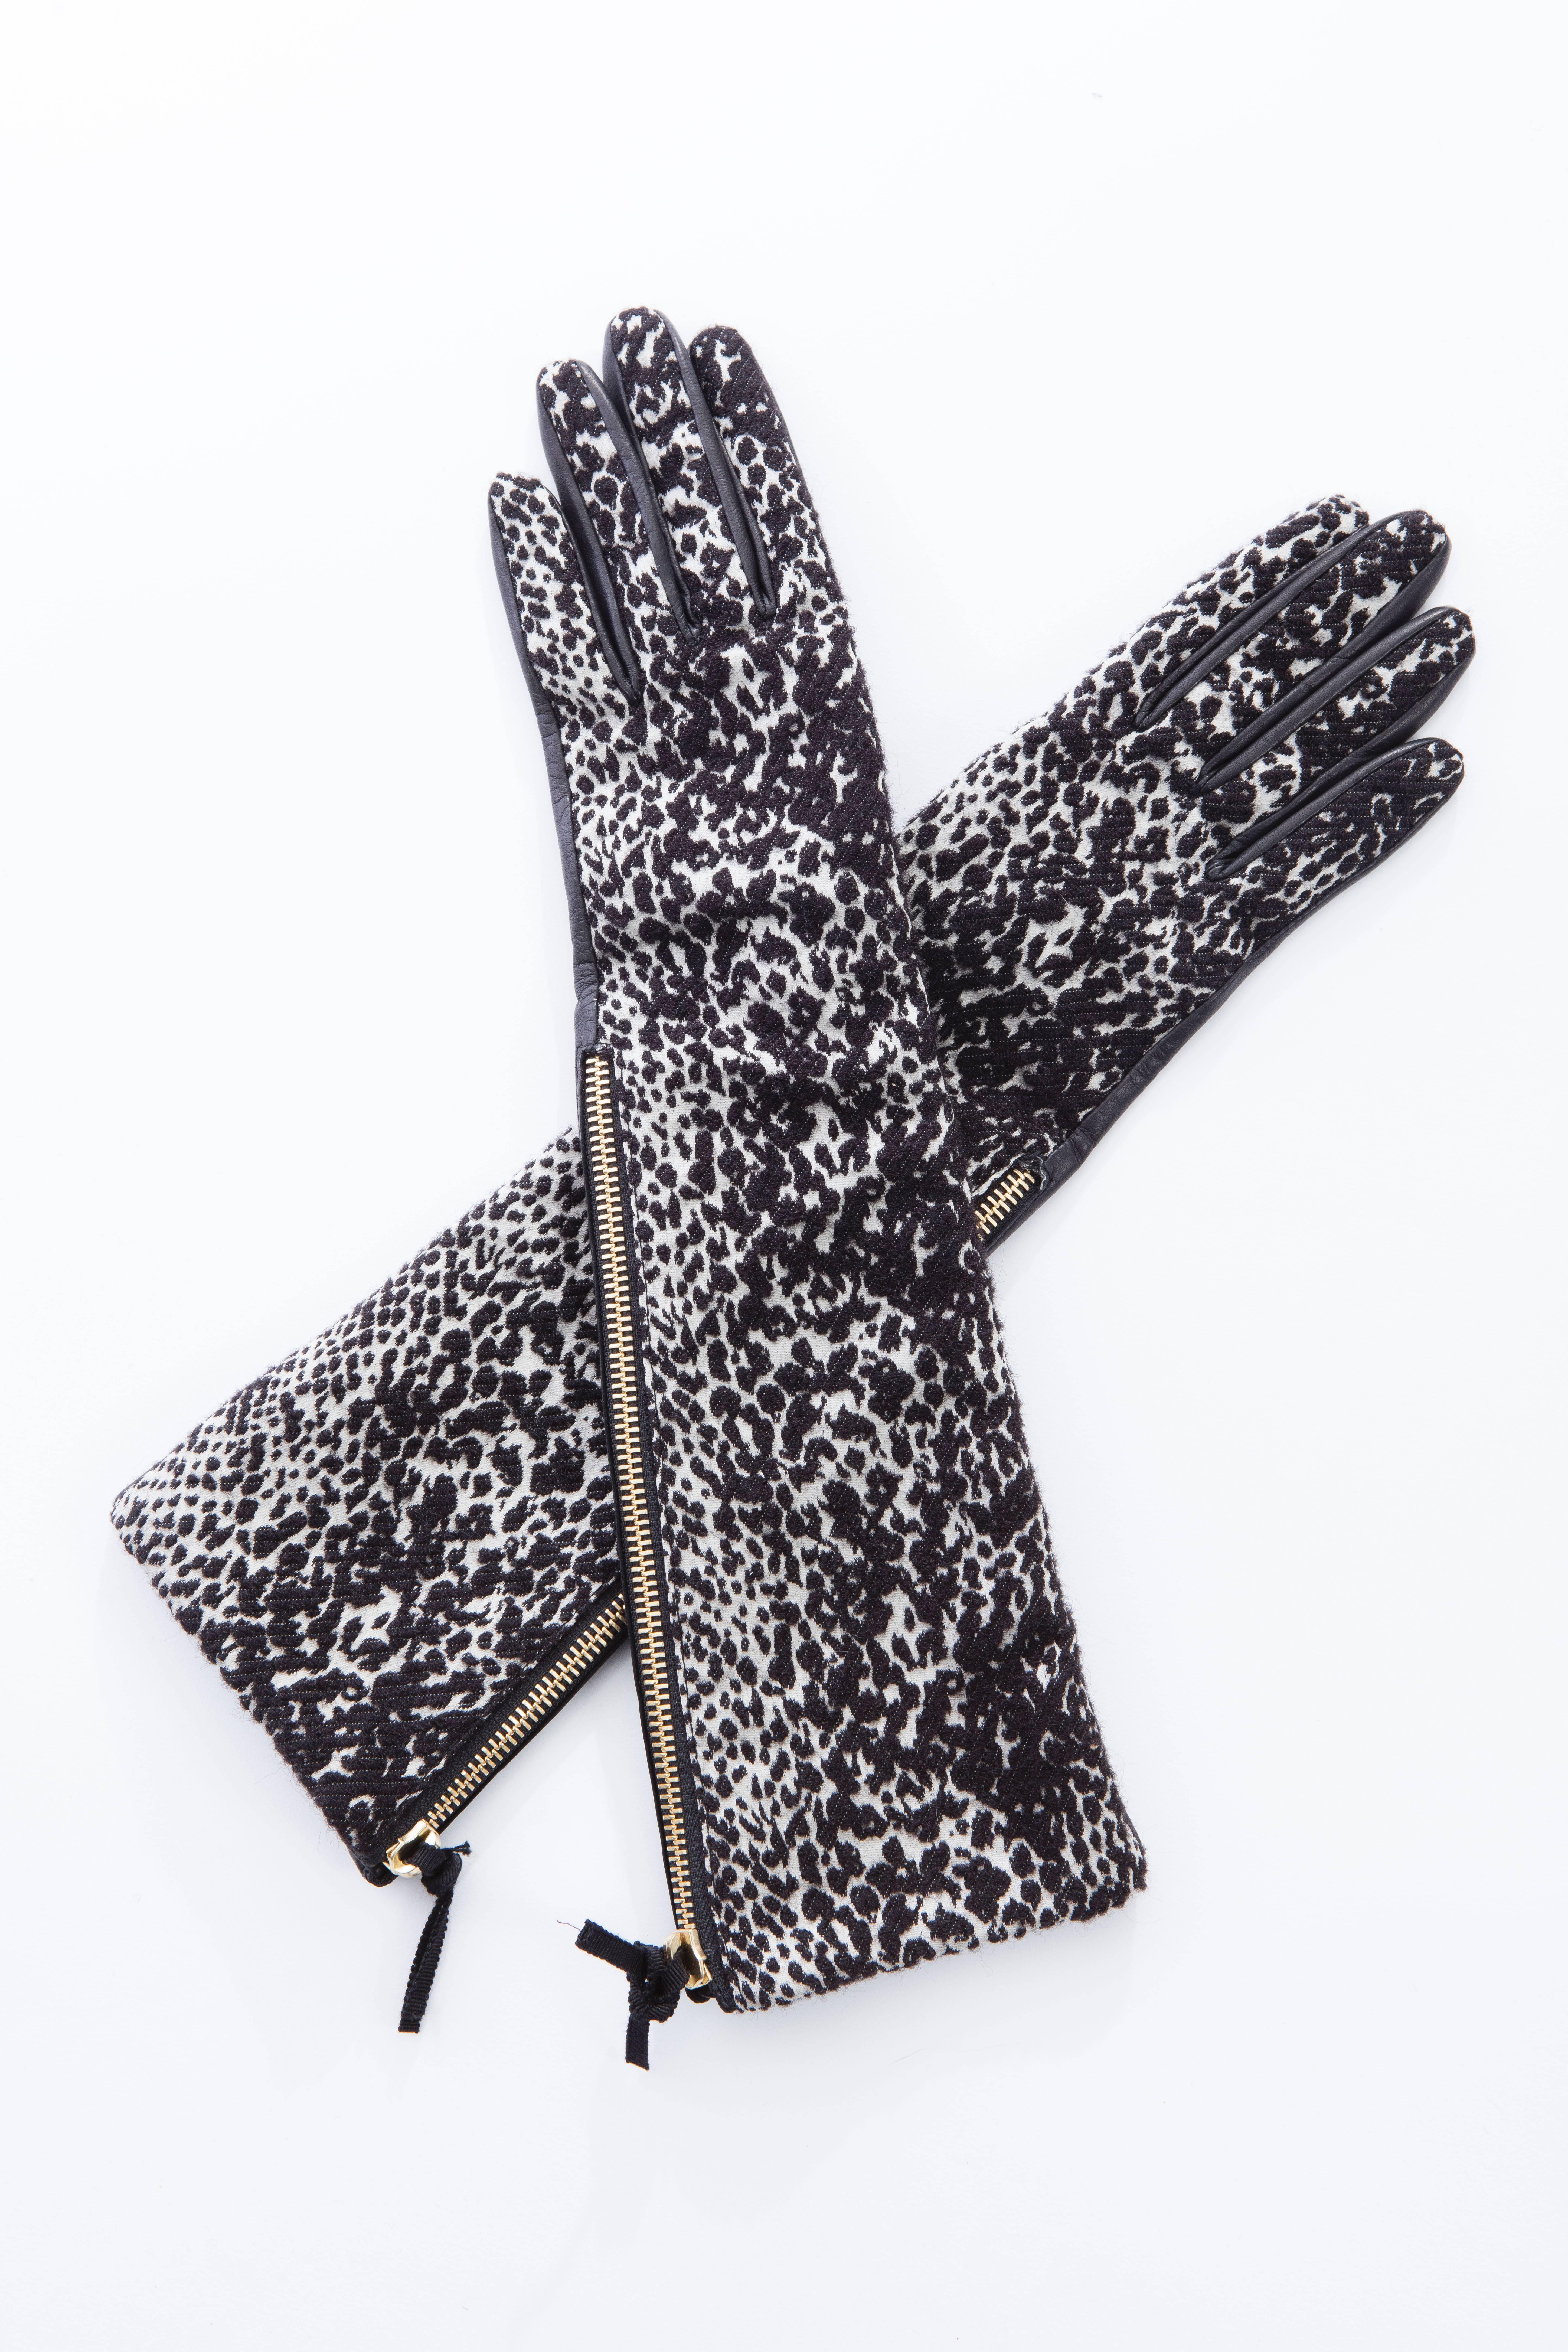 Lanvin gloves with leather at backs, print throughout and gold-tone zip closures at sides. Size 6.5

Length 15